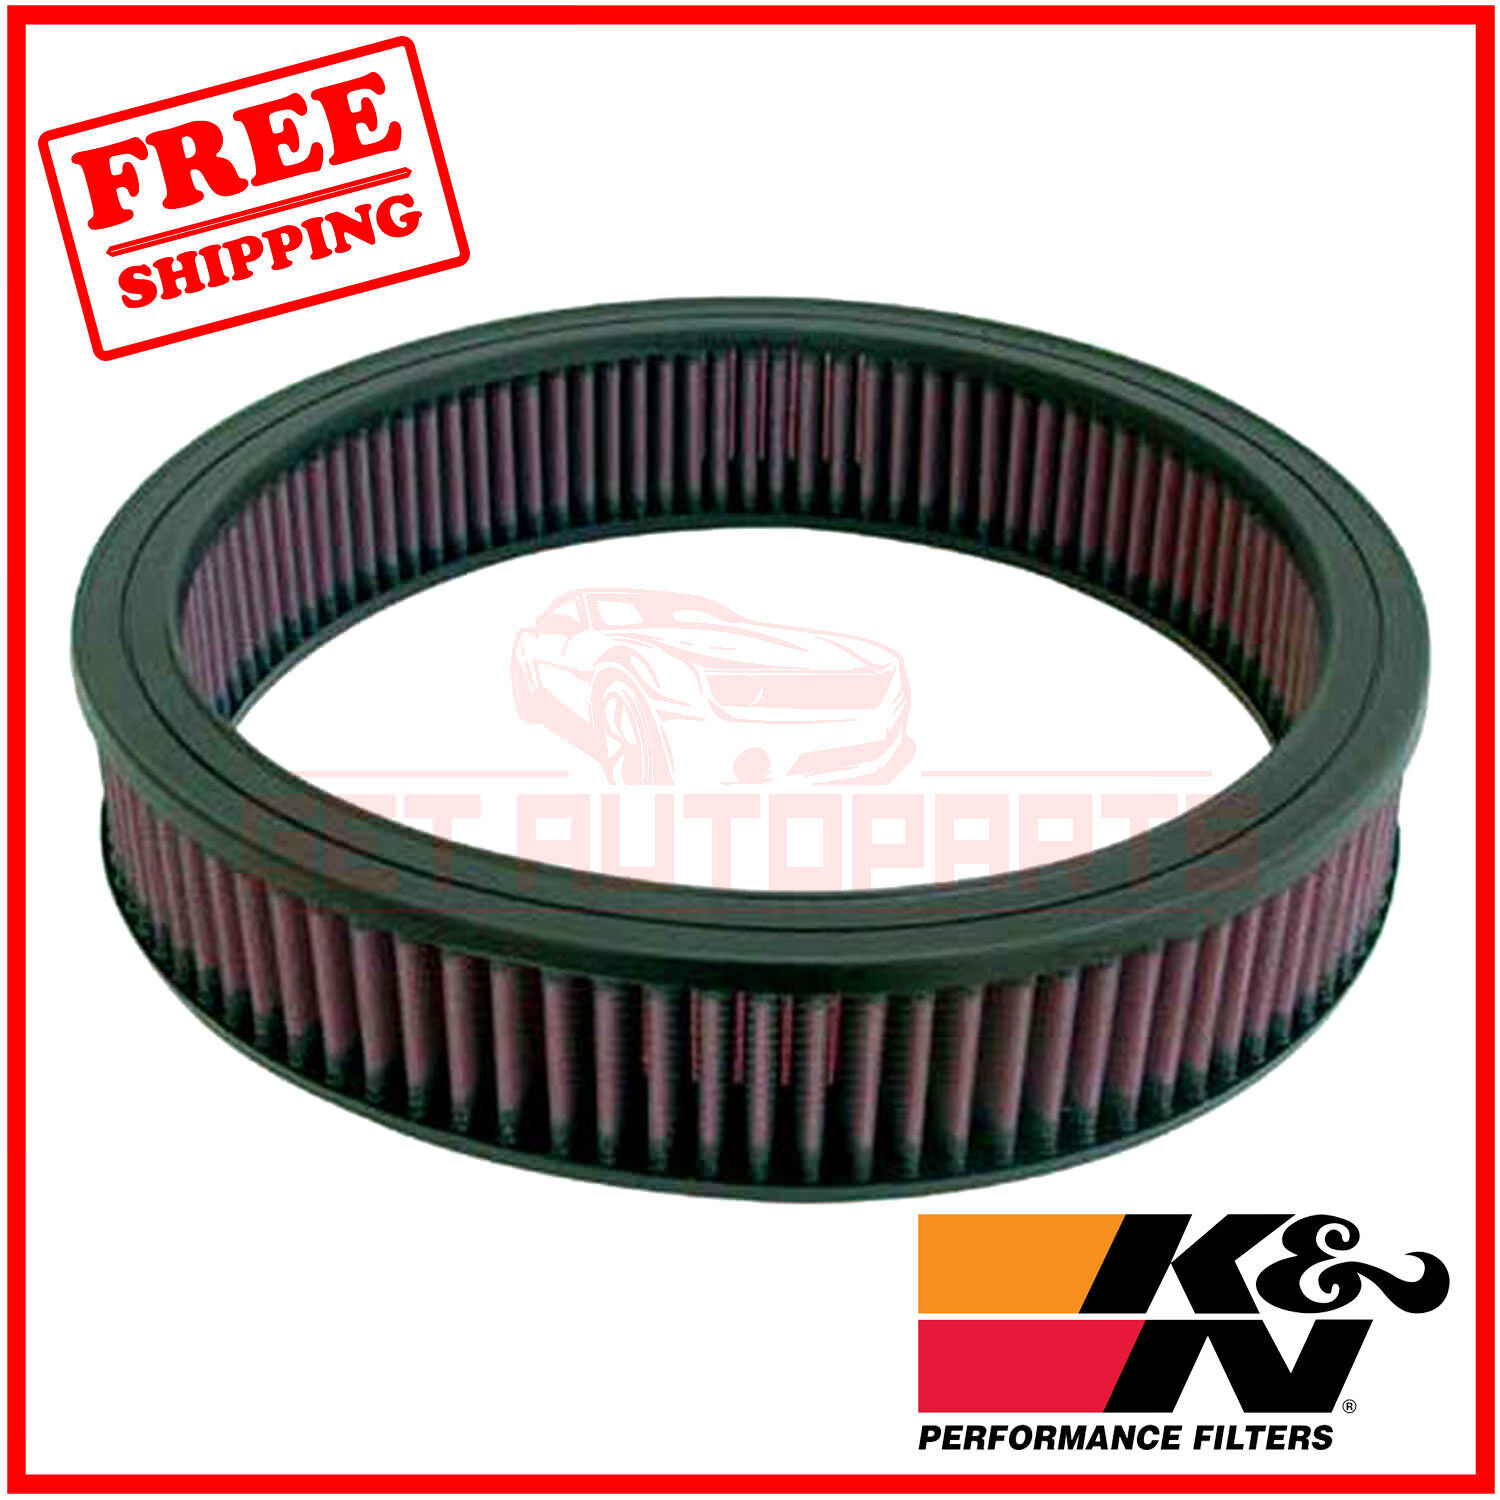 K&N Replacement Air Filter for Chevrolet Monza 1975-1980